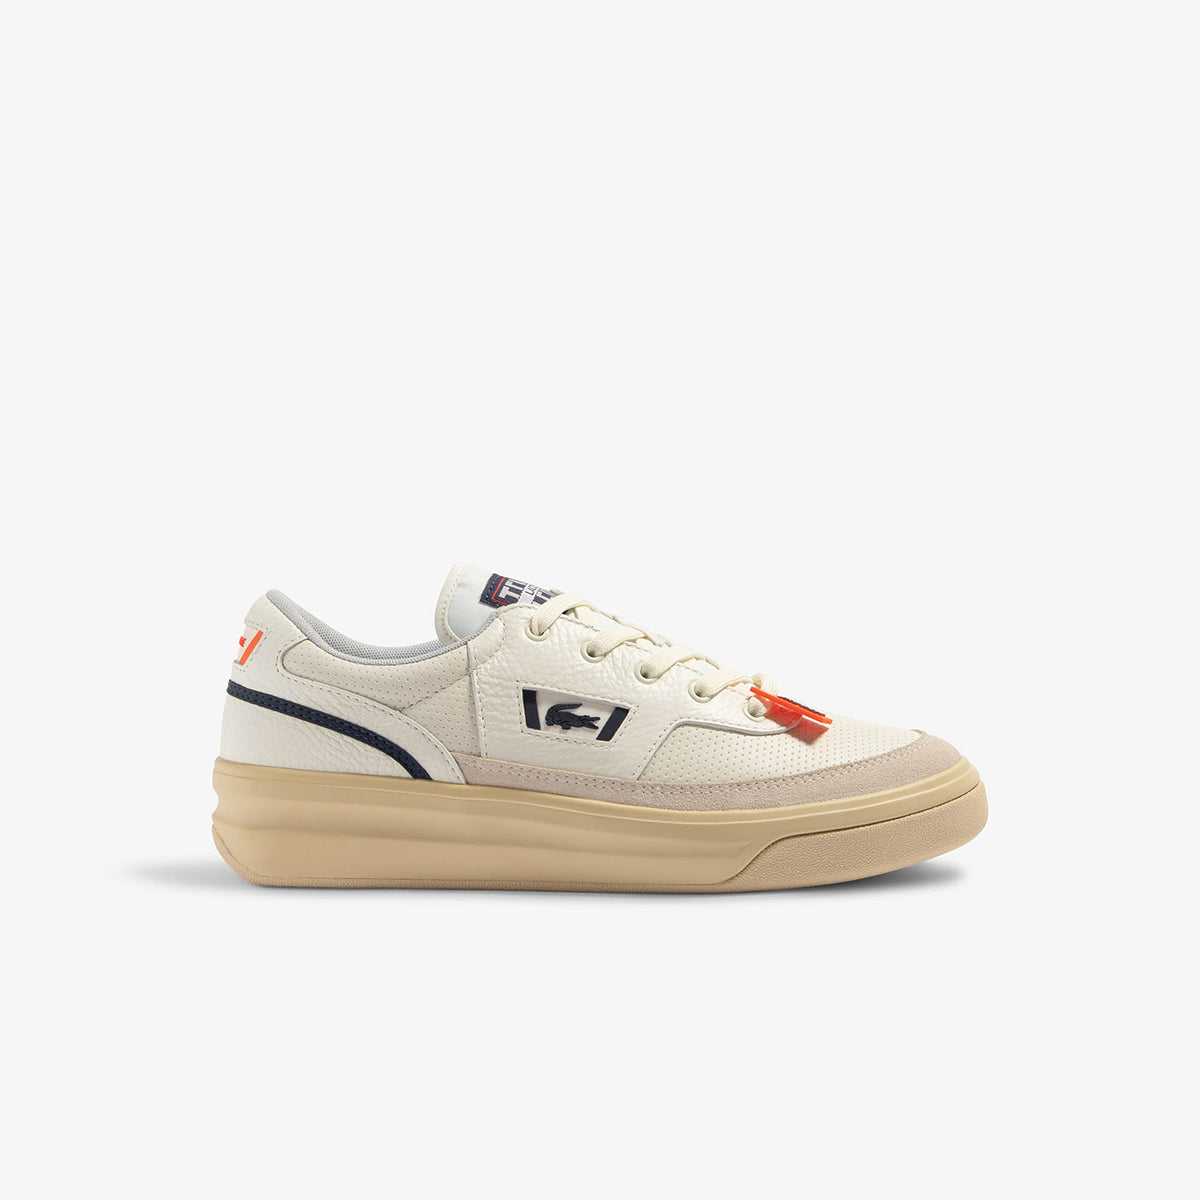 Lacoste G80 Leather Suede And Neoprene Trainers | LEVISONS